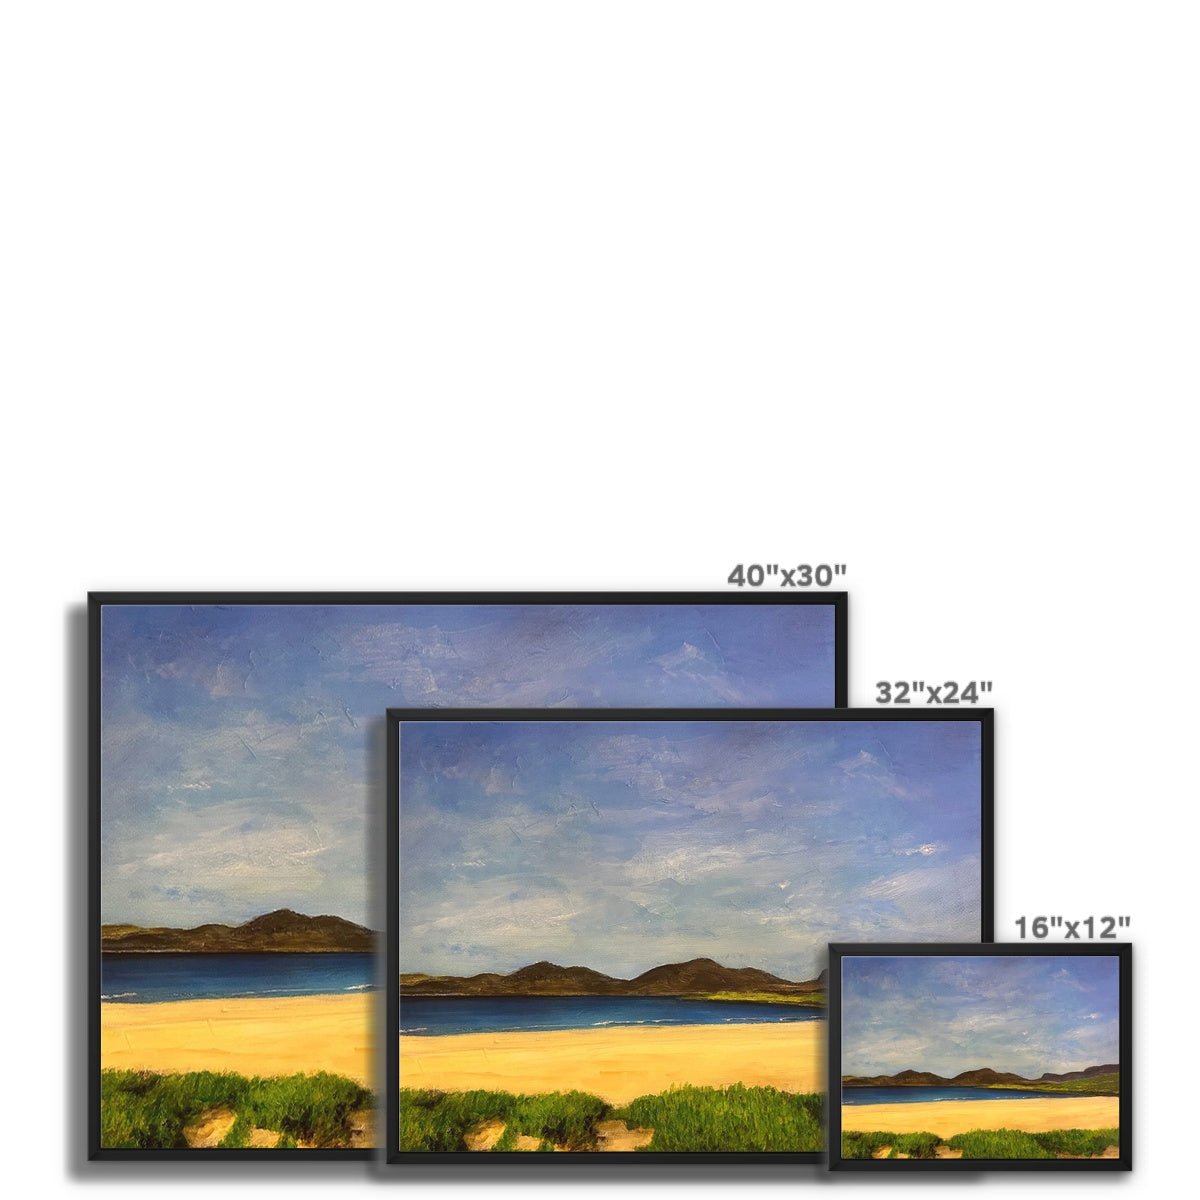 Luskentyre Beach Harris Painting | Framed Canvas From Scotland-Floating Framed Canvas Prints-Hebridean Islands Art Gallery-Paintings, Prints, Homeware, Art Gifts From Scotland By Scottish Artist Kevin Hunter